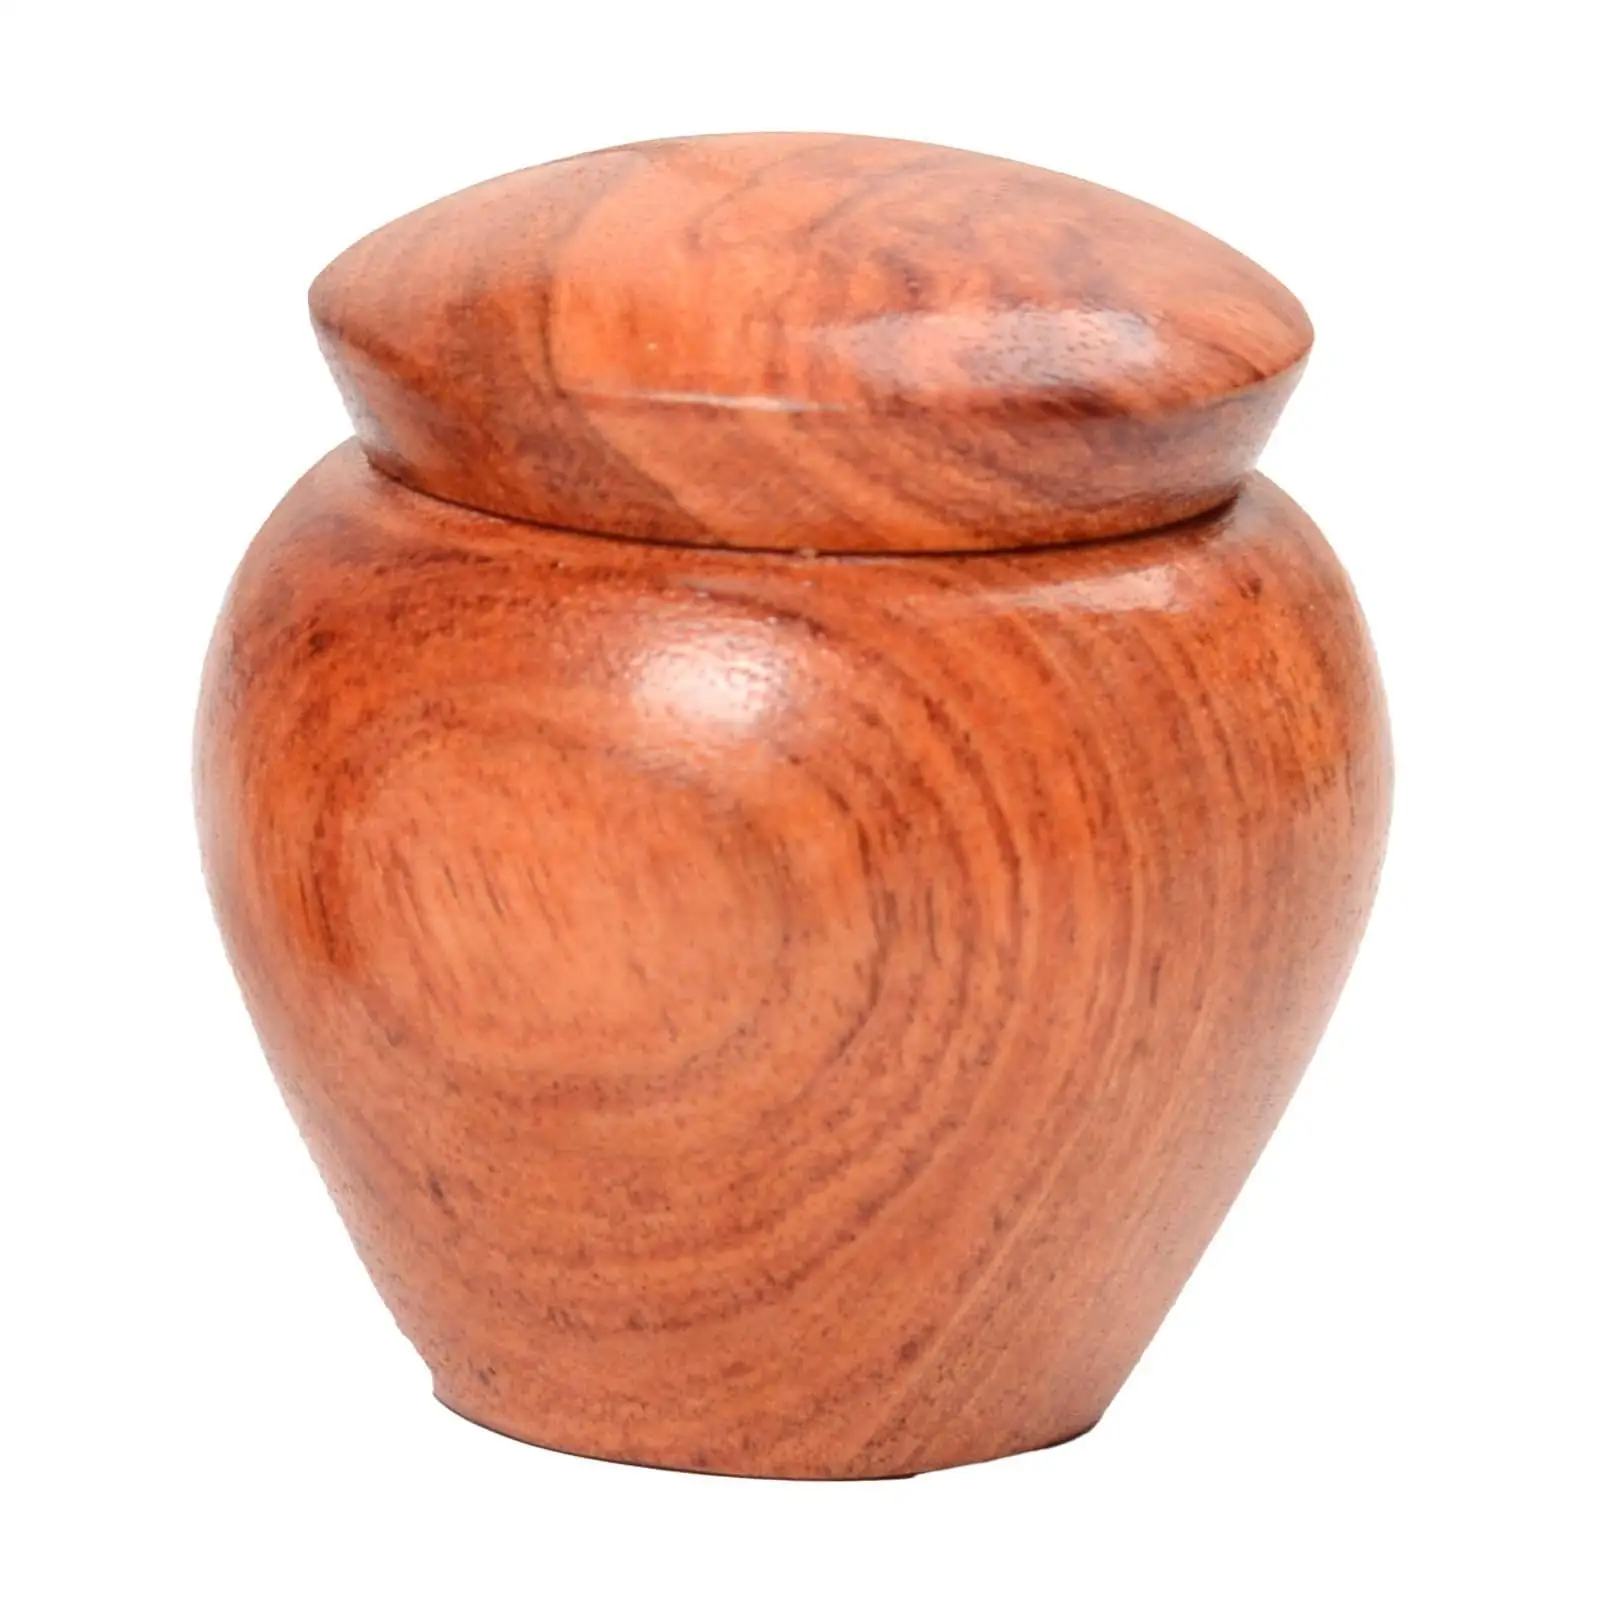 Wooden Jar Spice Container Beans Candy Chocolate Sugar Mini Tea Storage Container for Camping Dining Table BBQ Restaurant